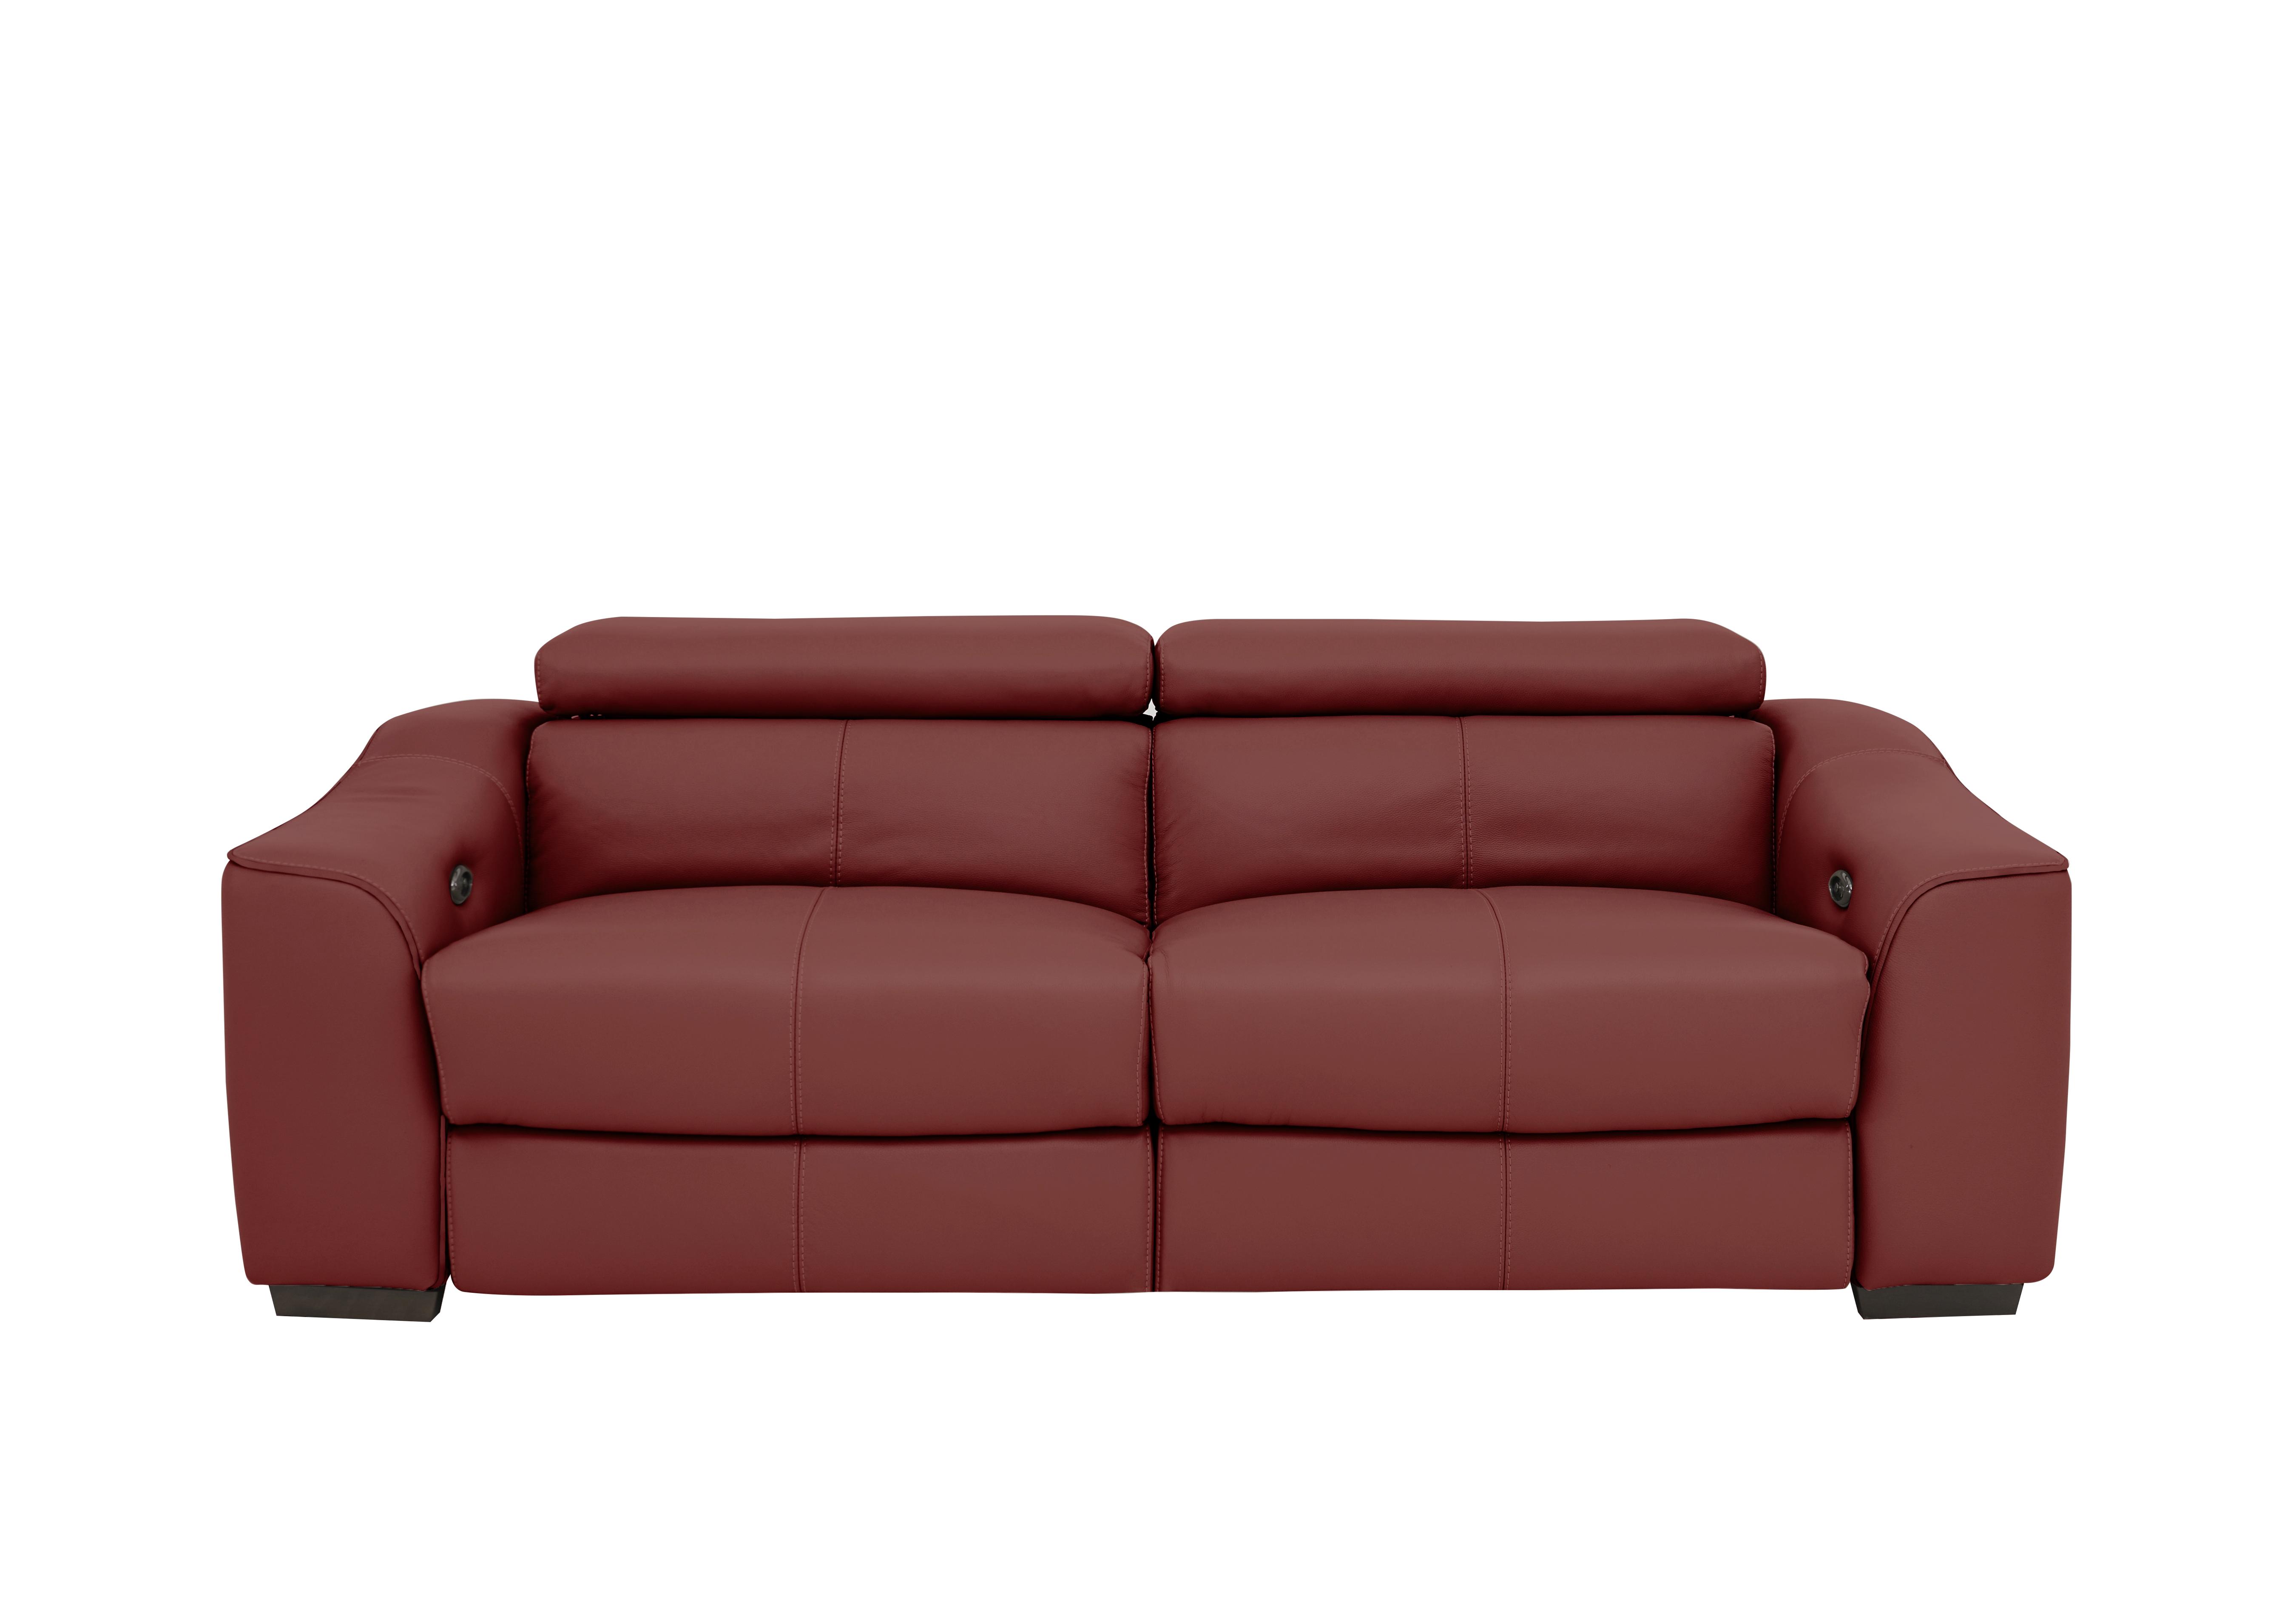 Elixir 3 Seater Leather Sofa in Bv-035c Deep Red on Furniture Village